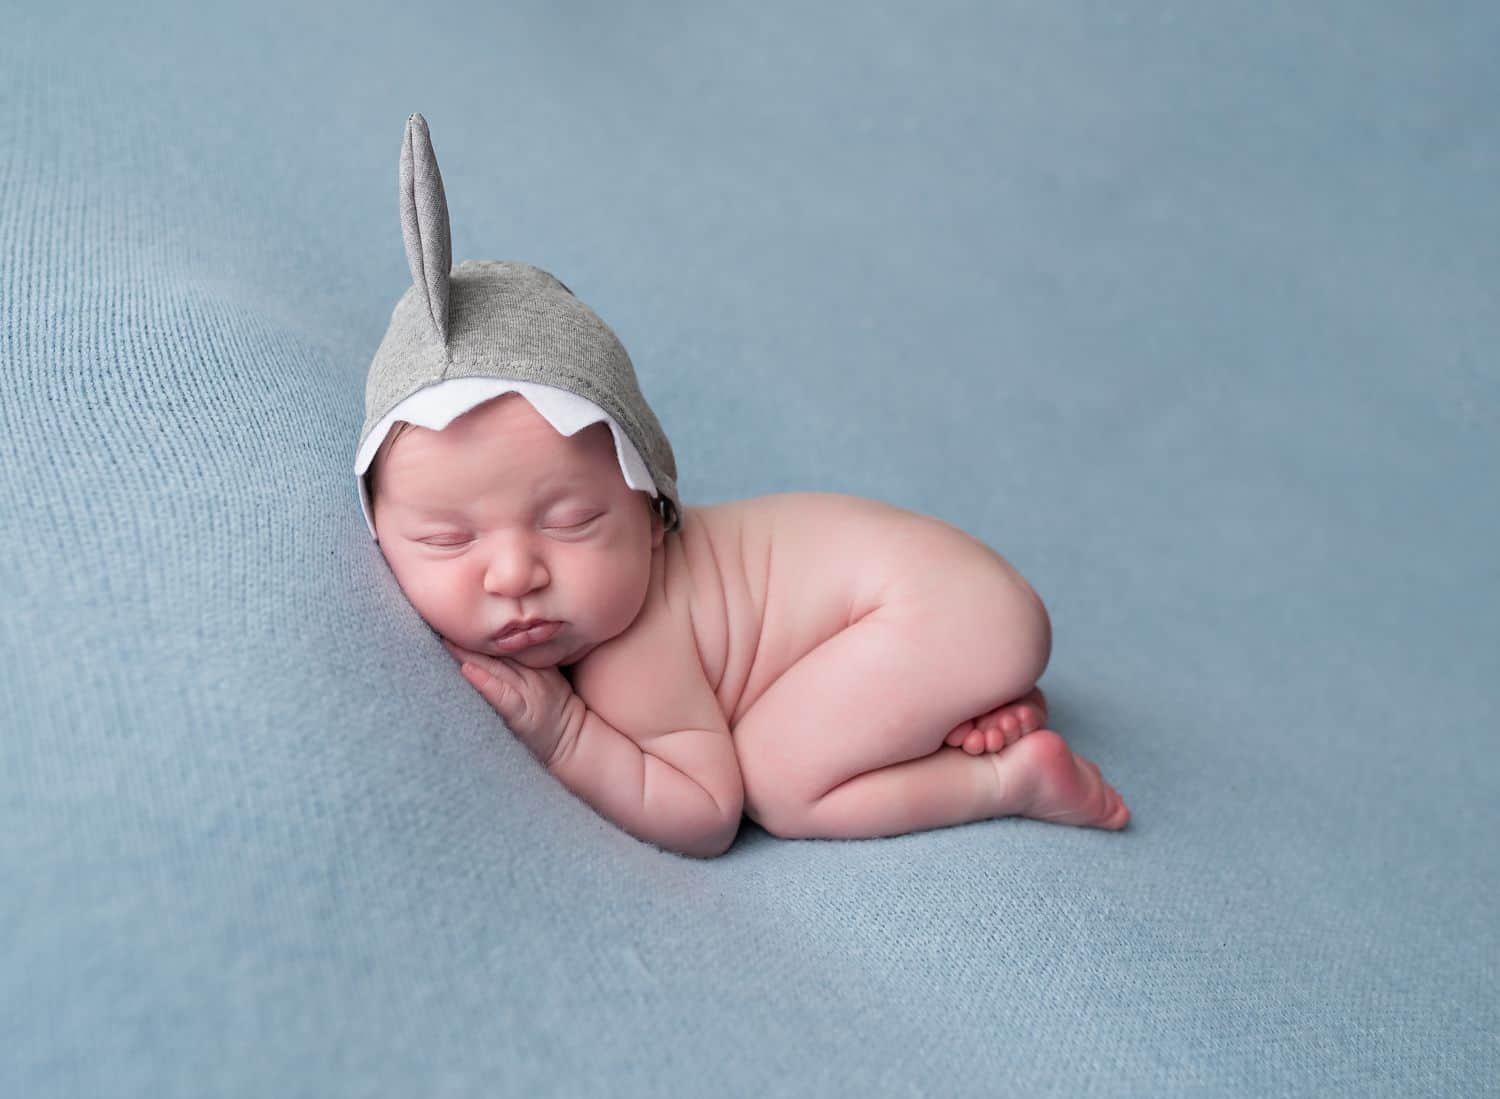 The best newborn photography props don't have to be complicated. This simple setup shows a newborn in froggy pose asleep on a blue cushion while wearing a tiny cotton shark fin hat.